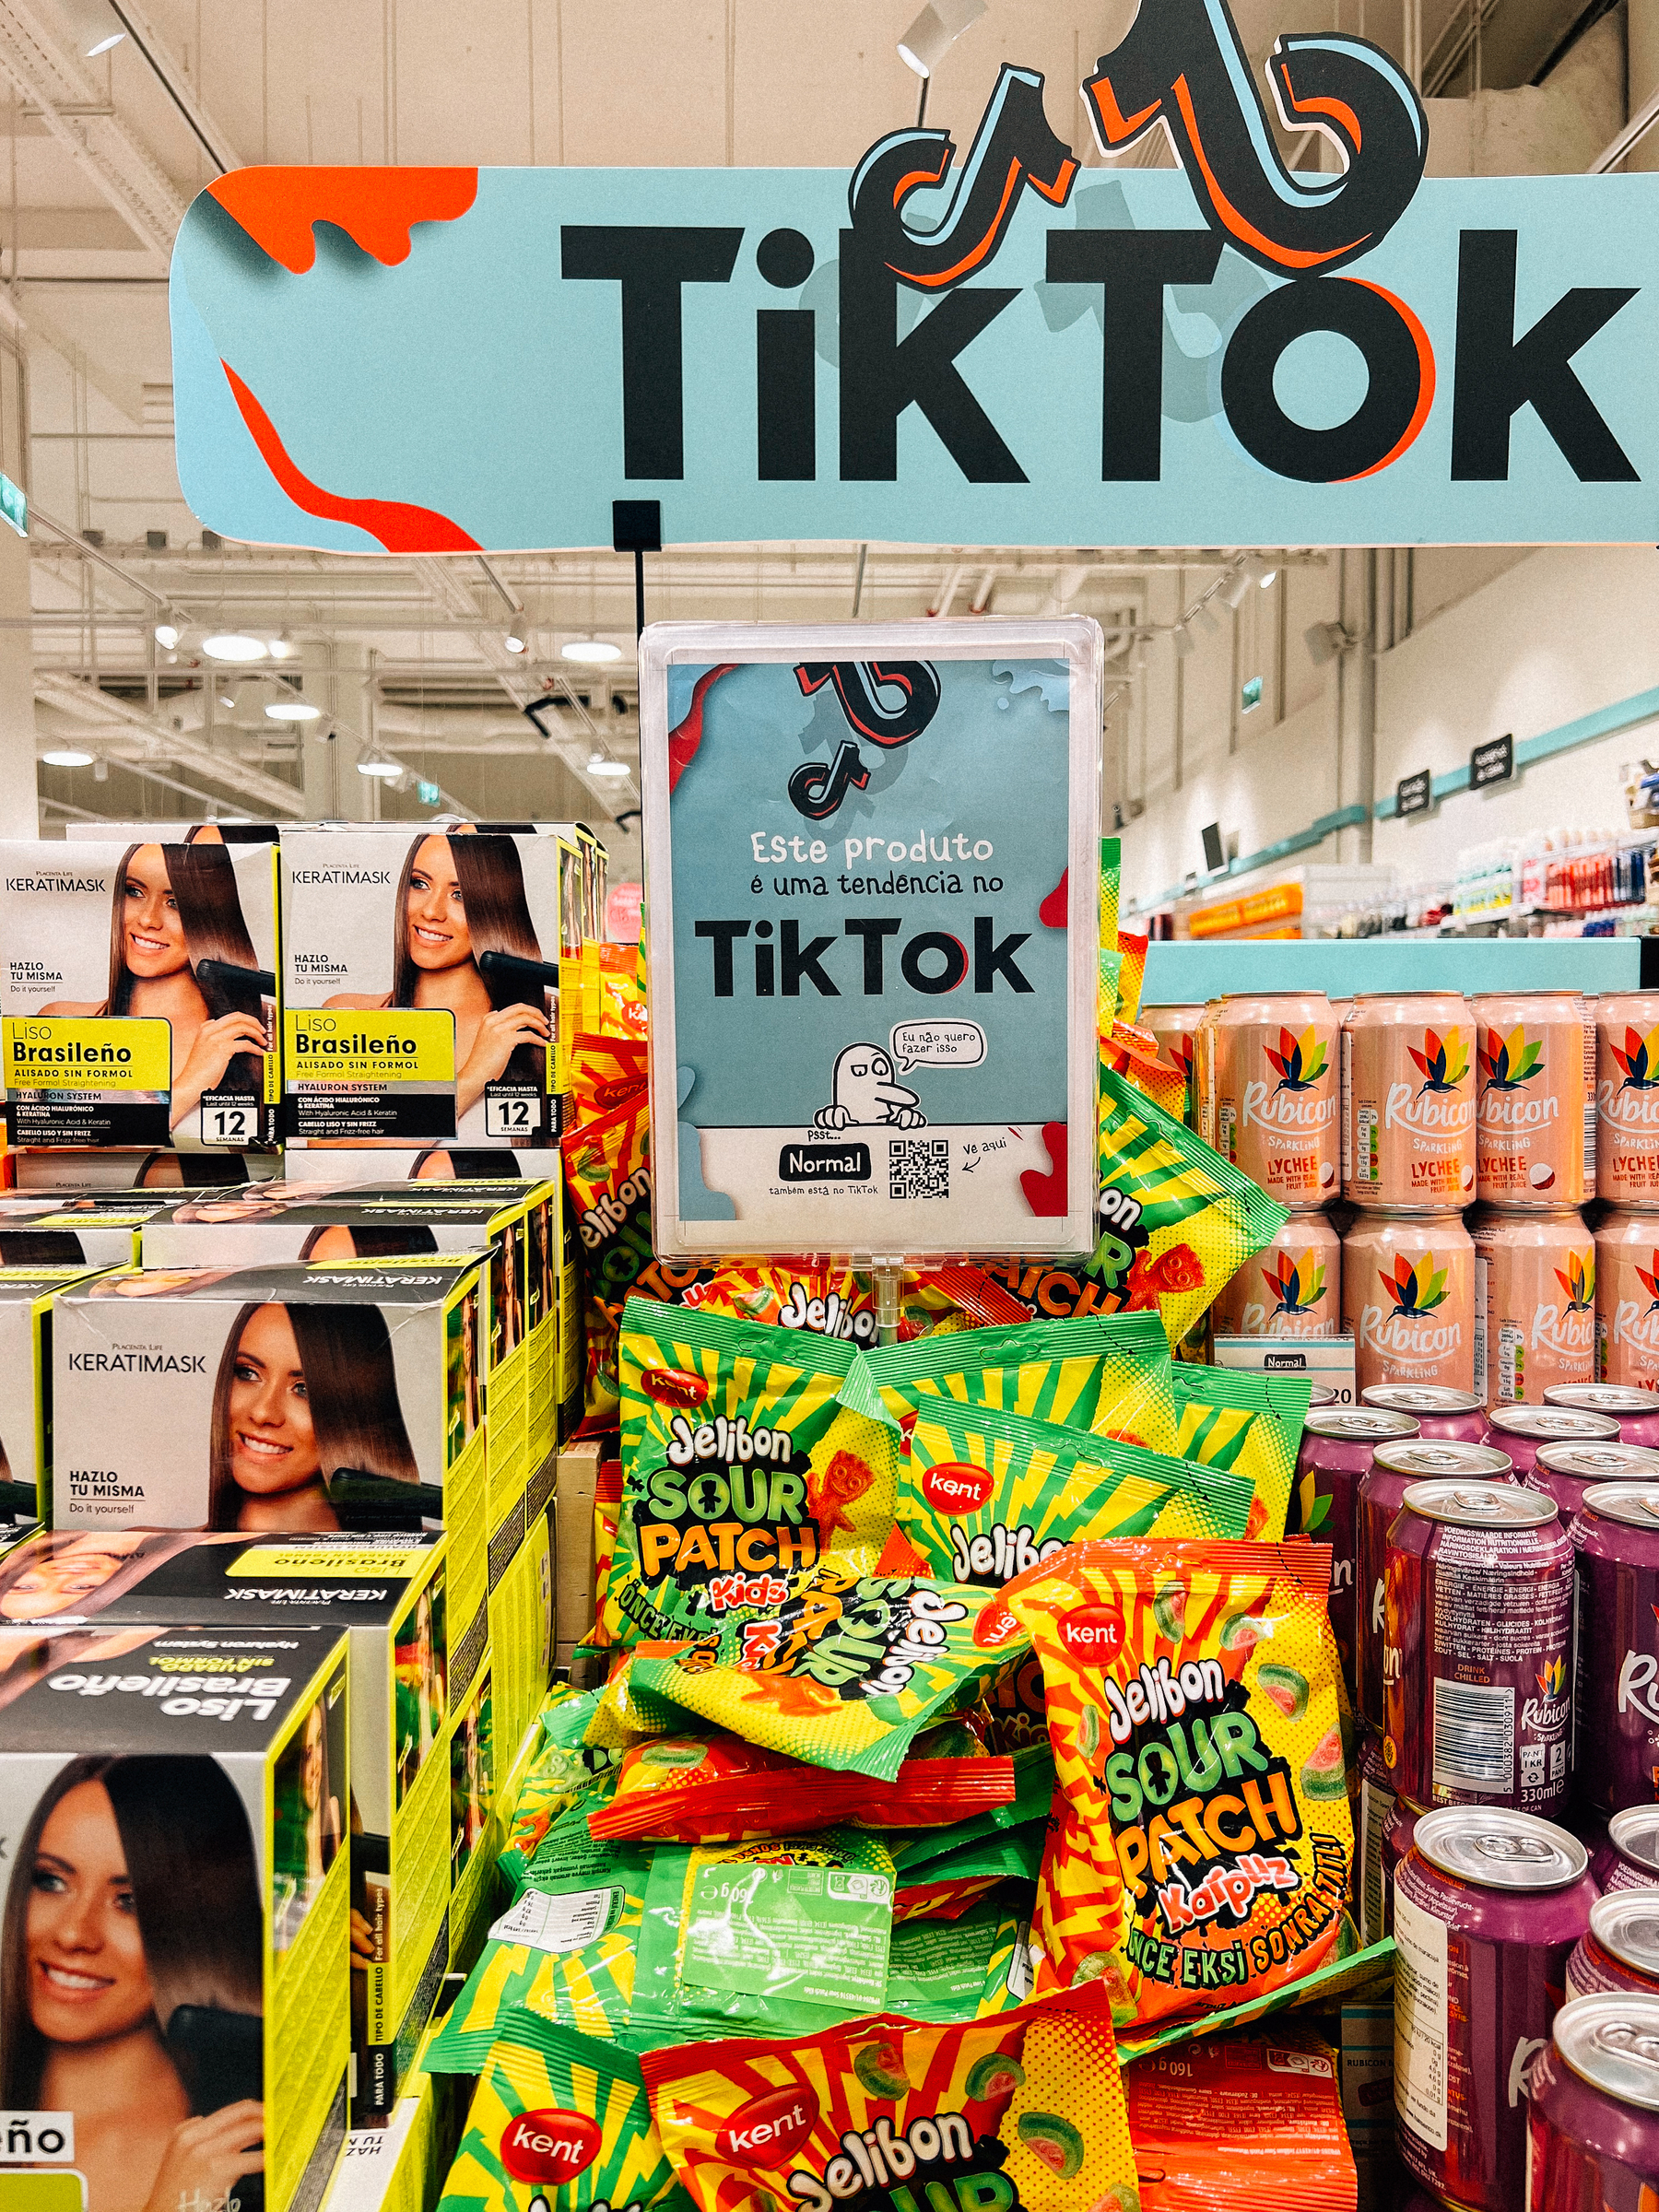 A display in a store featuring a variety of products, including hair care boxes and Sour Patch Kids candy, with a sign overhead reading &ldquo;TikTok&rdquo; suggesting these items are popular or trending on the TikTok platform.